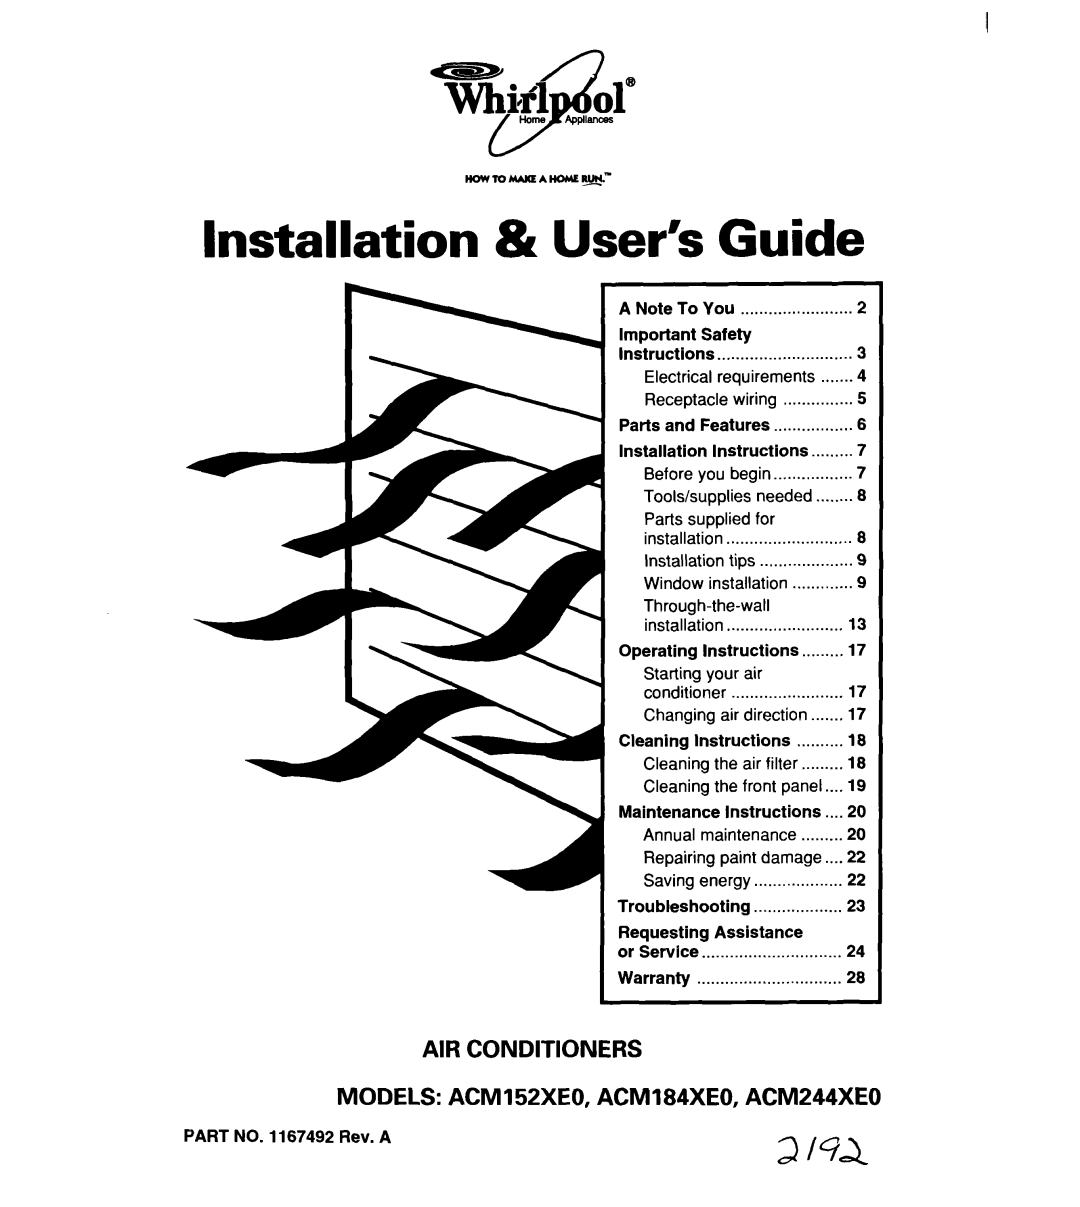 Whirlpool ACM244XE0, ACM 152XE0, ACM184XE0 important safety instructions Installation & User’s Guide, Air Conditioners 